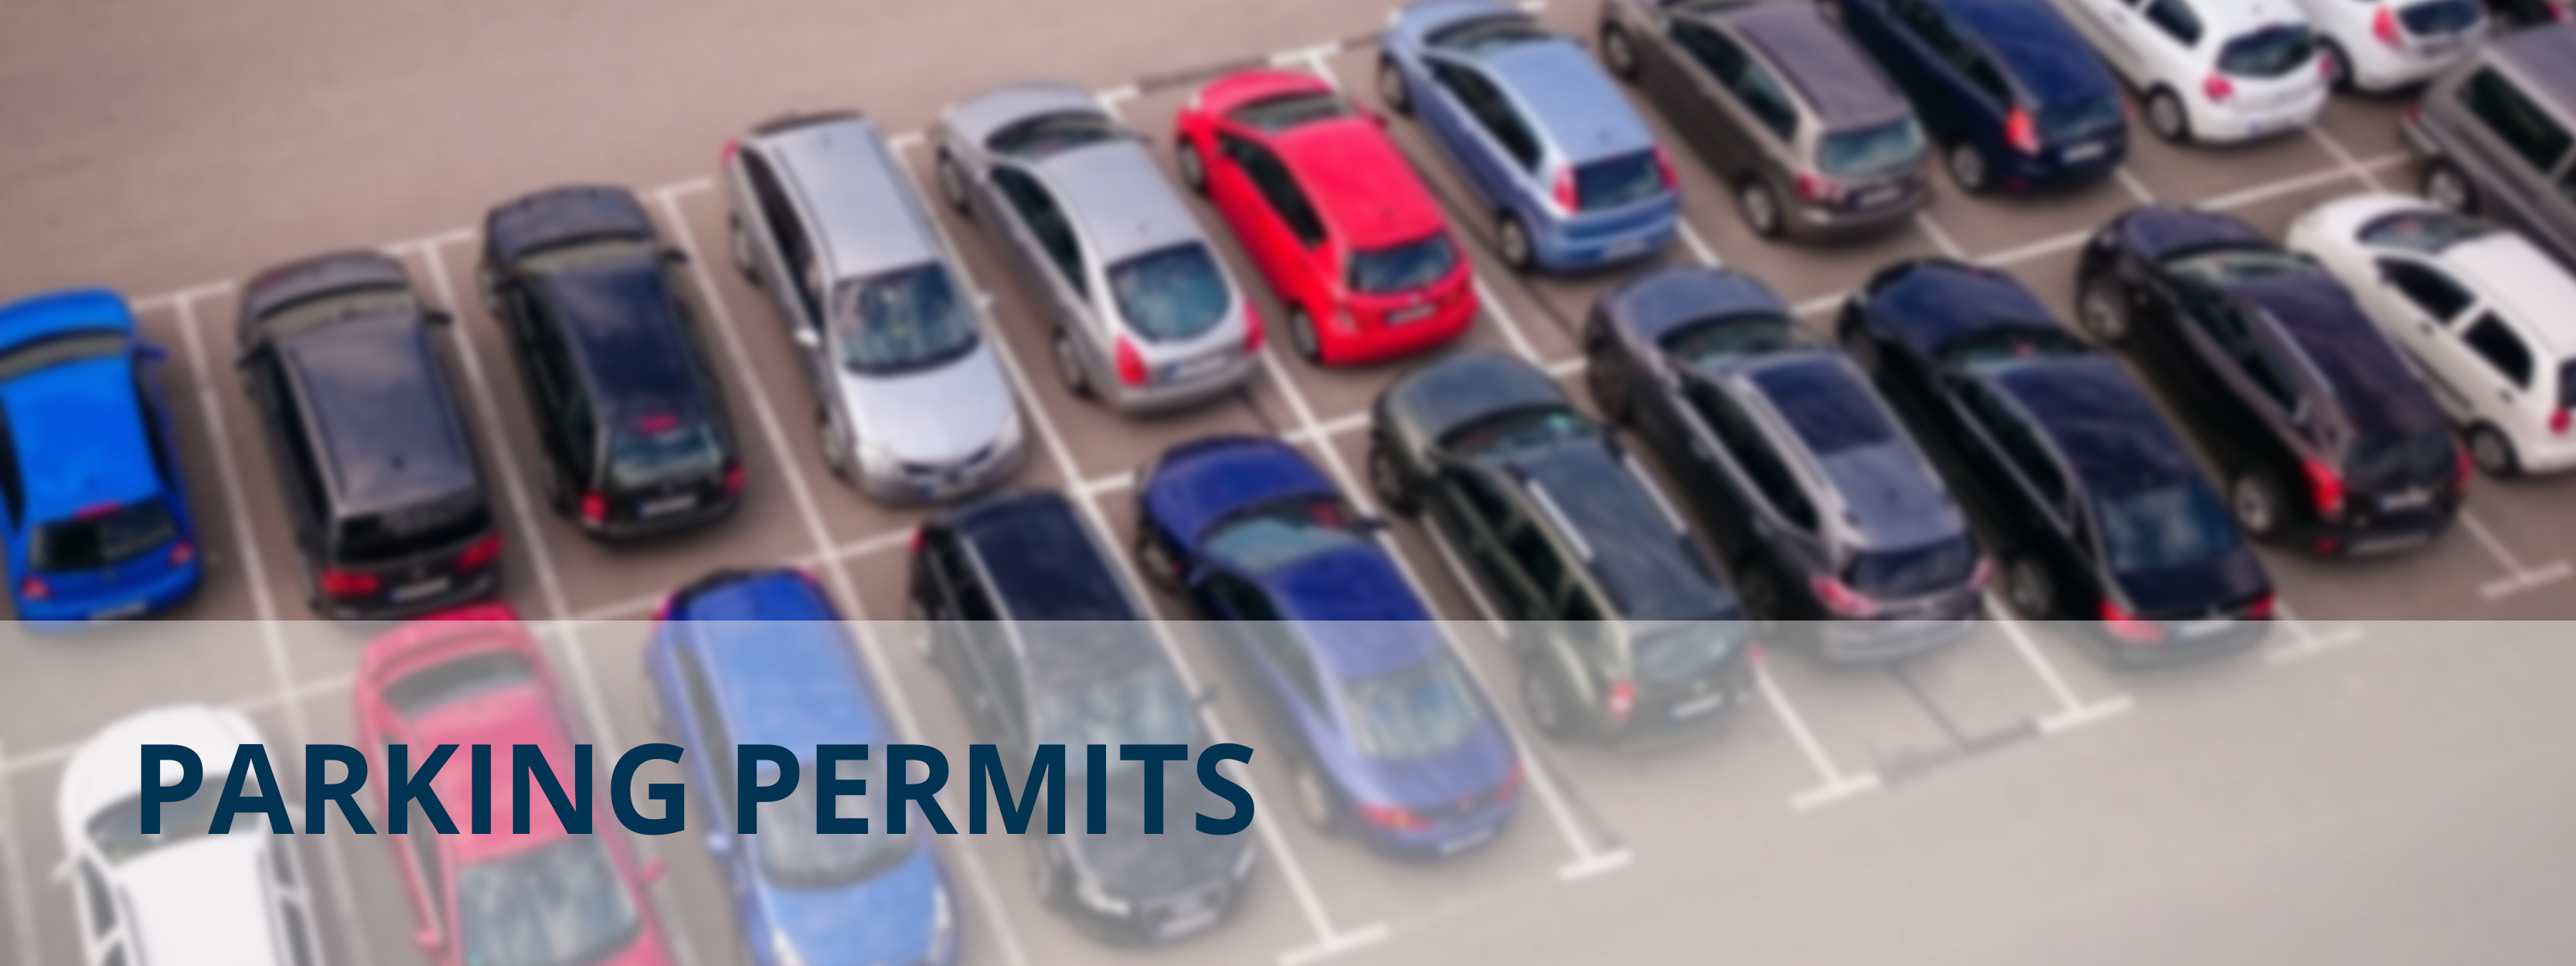 An image of cars in a parking lot overlayed with the text "Parking Permits"